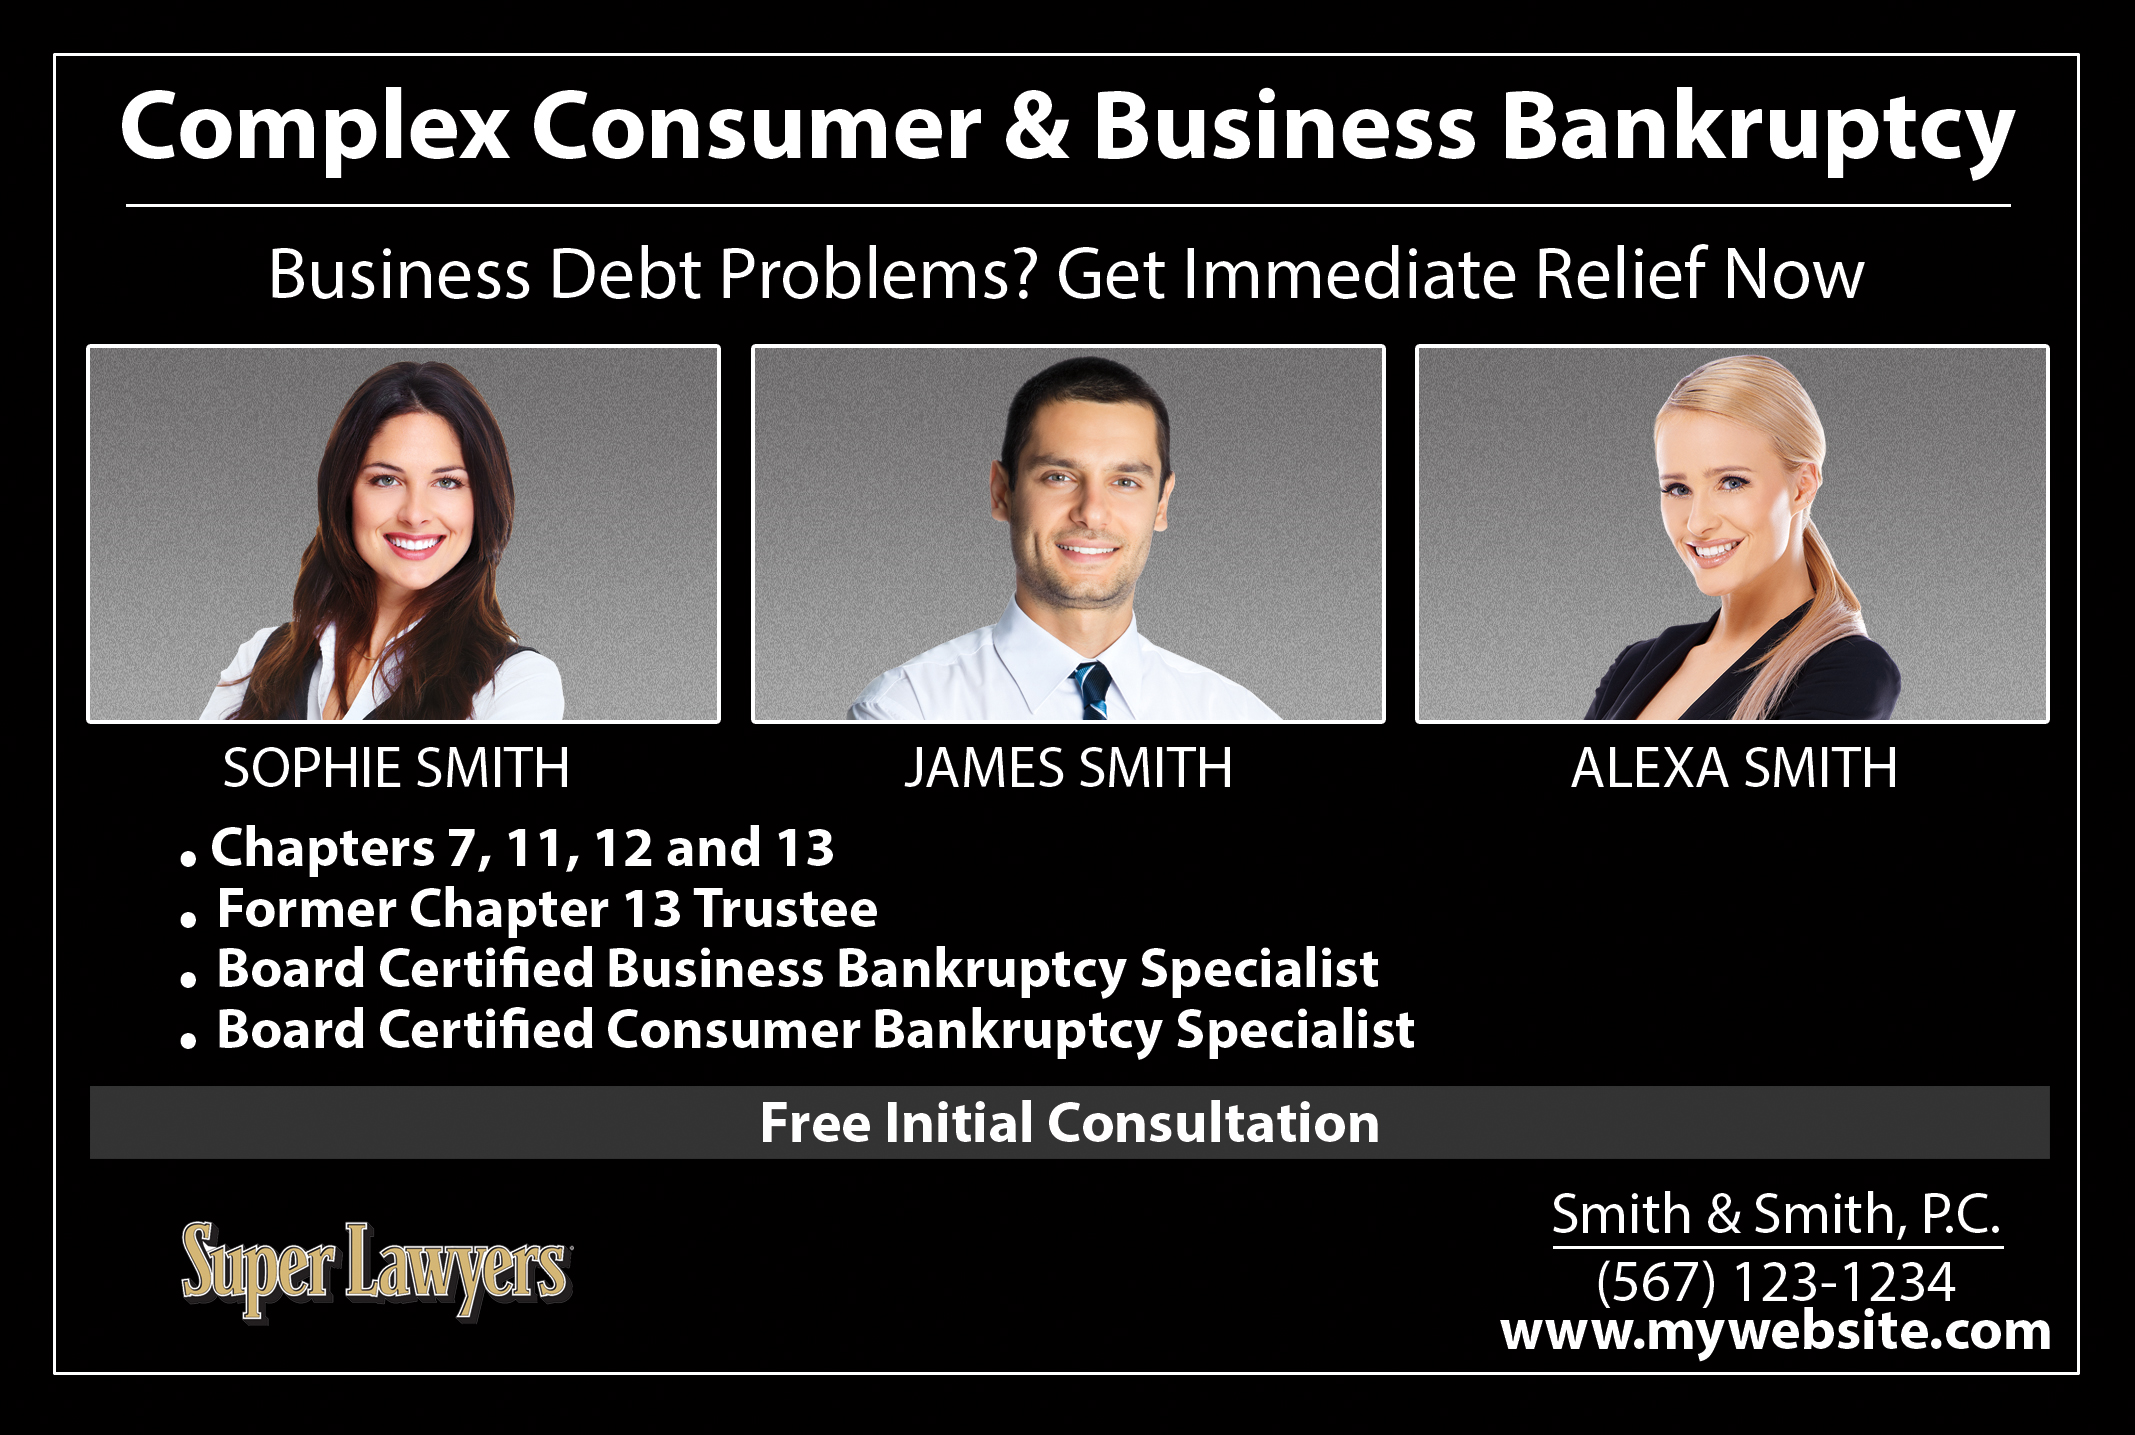 Bankruptcy Cards, Complex Consumer Cards, Business Bankruptcy Cards, Lawyer Cards, Law Firm Cards, Attorney Cards, Legal Cards, Law Office Cards, Ticket Law Firm, Ticket Lawyer, Traffic Lawyer, Ticket Attorney